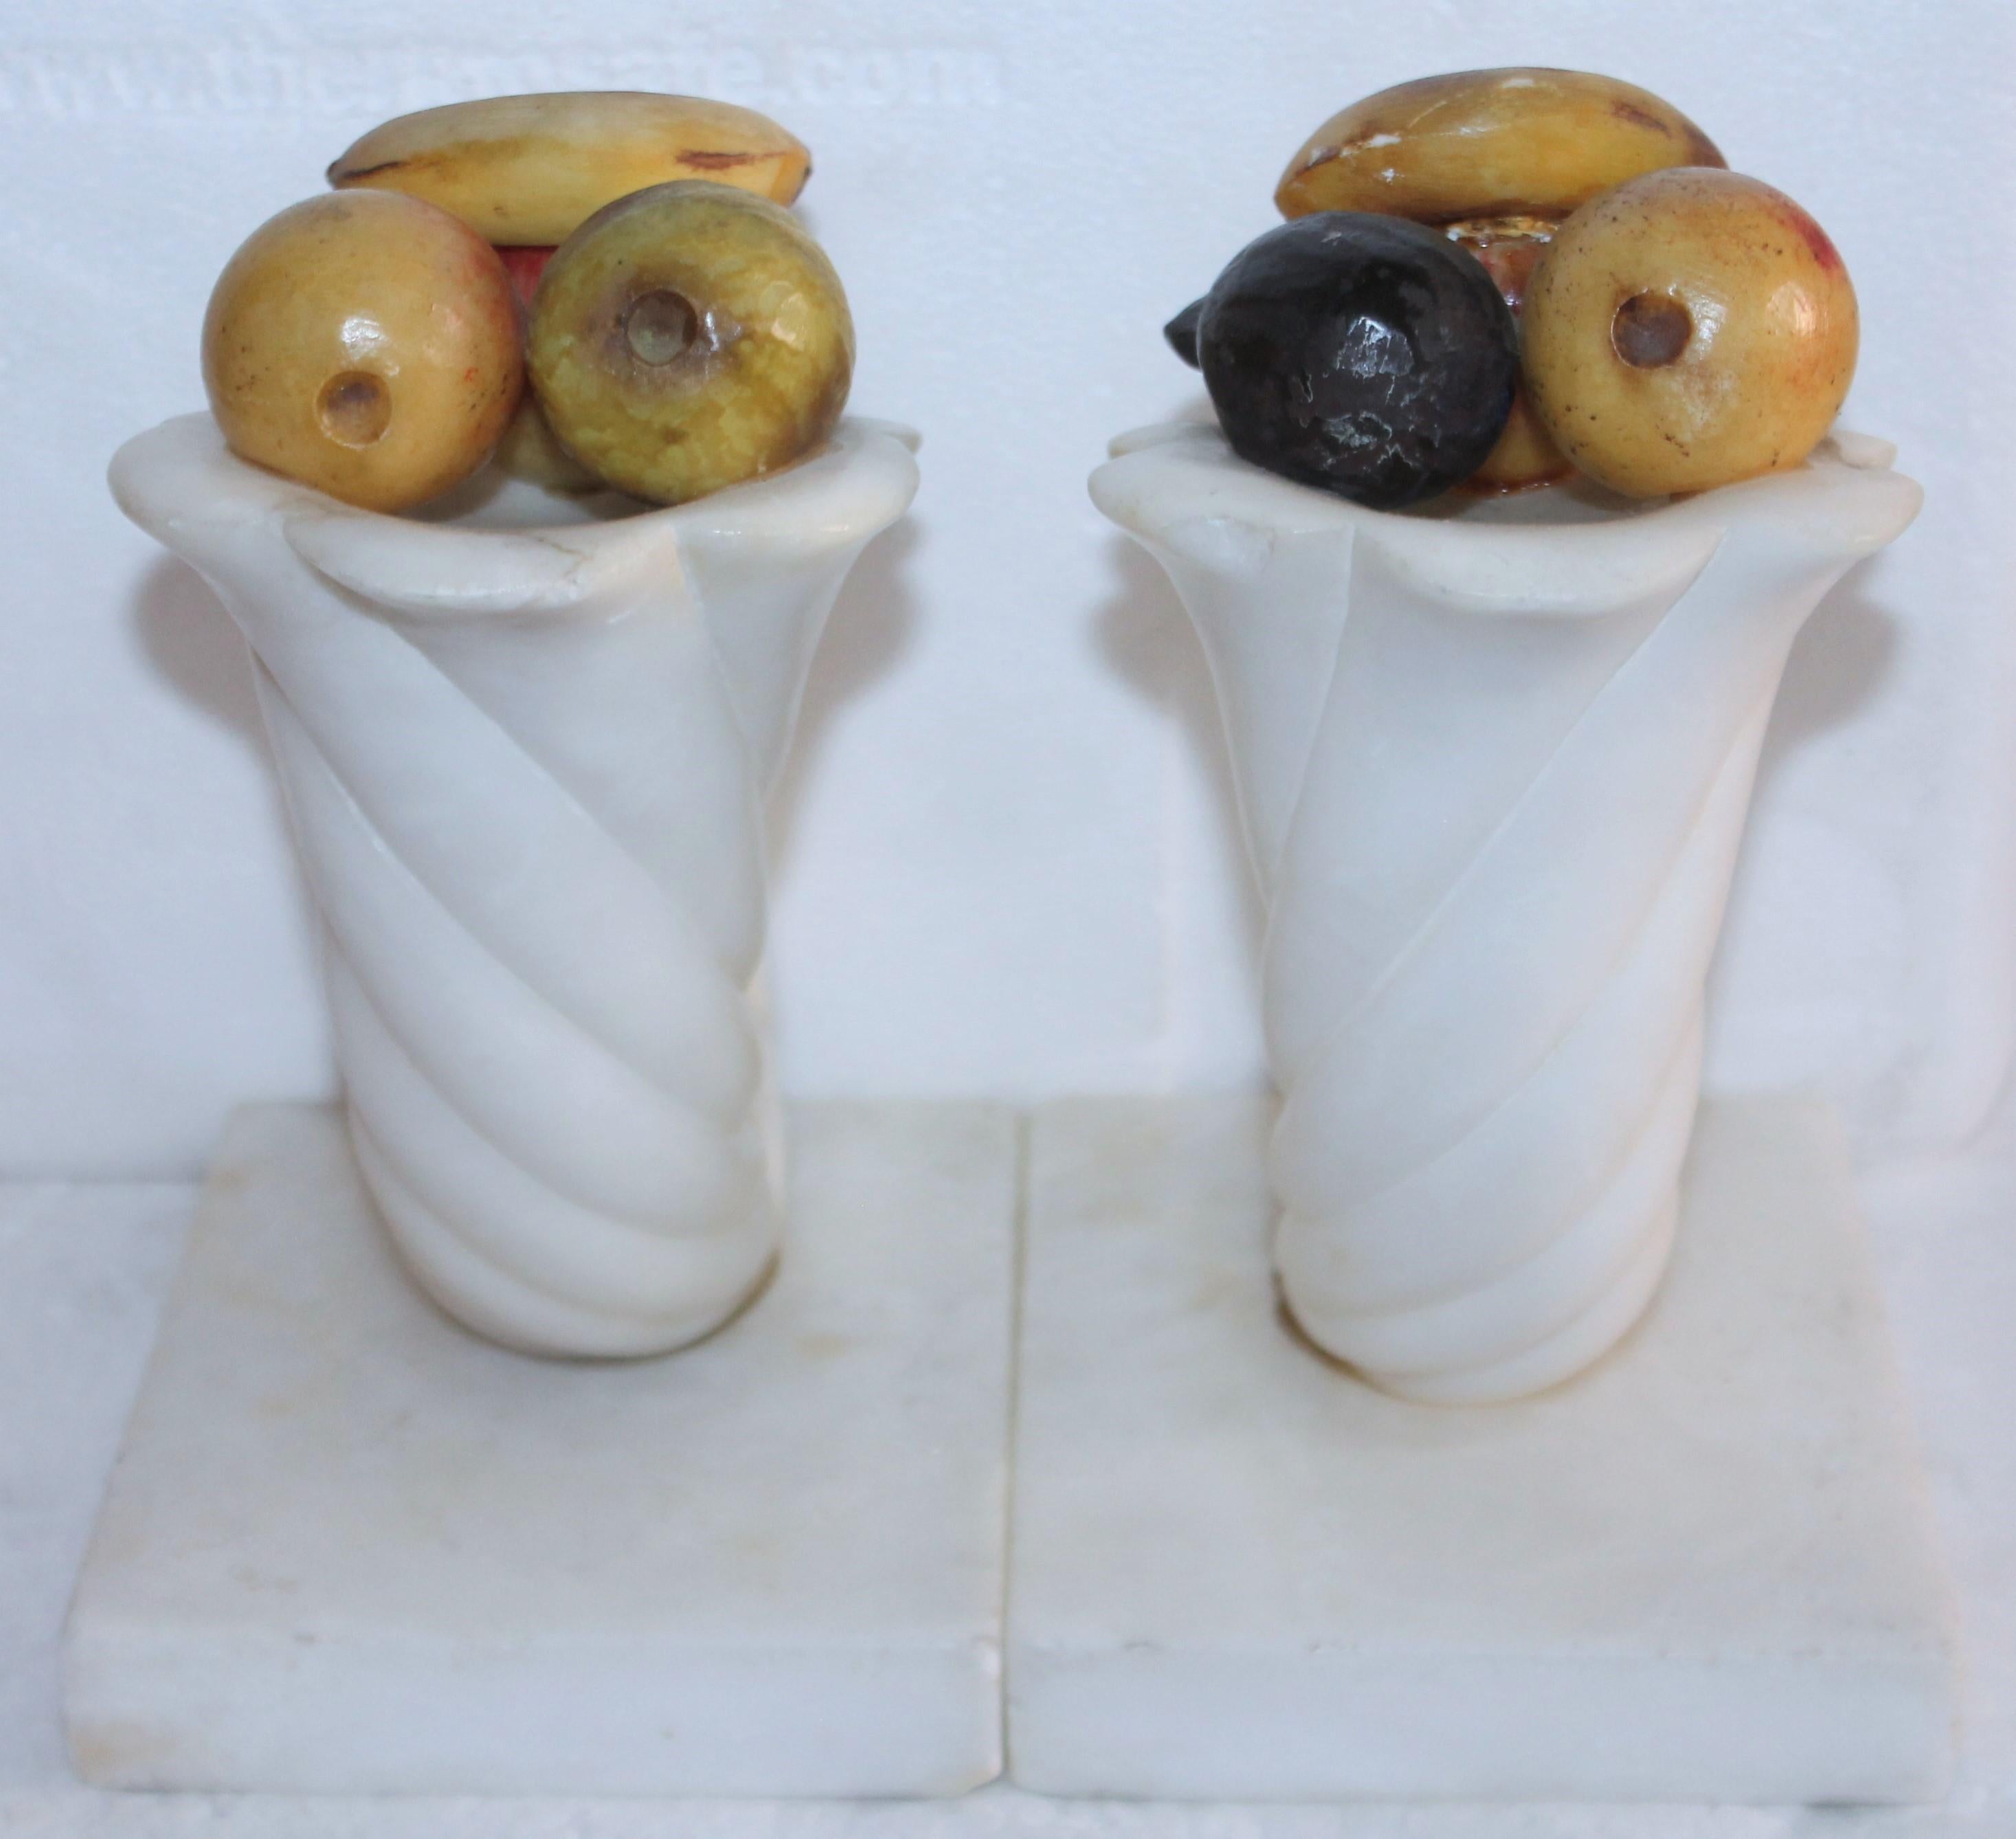 19th century Alabaster cornucopia bookends with painted mini alabaster fruit. The condition is very good.